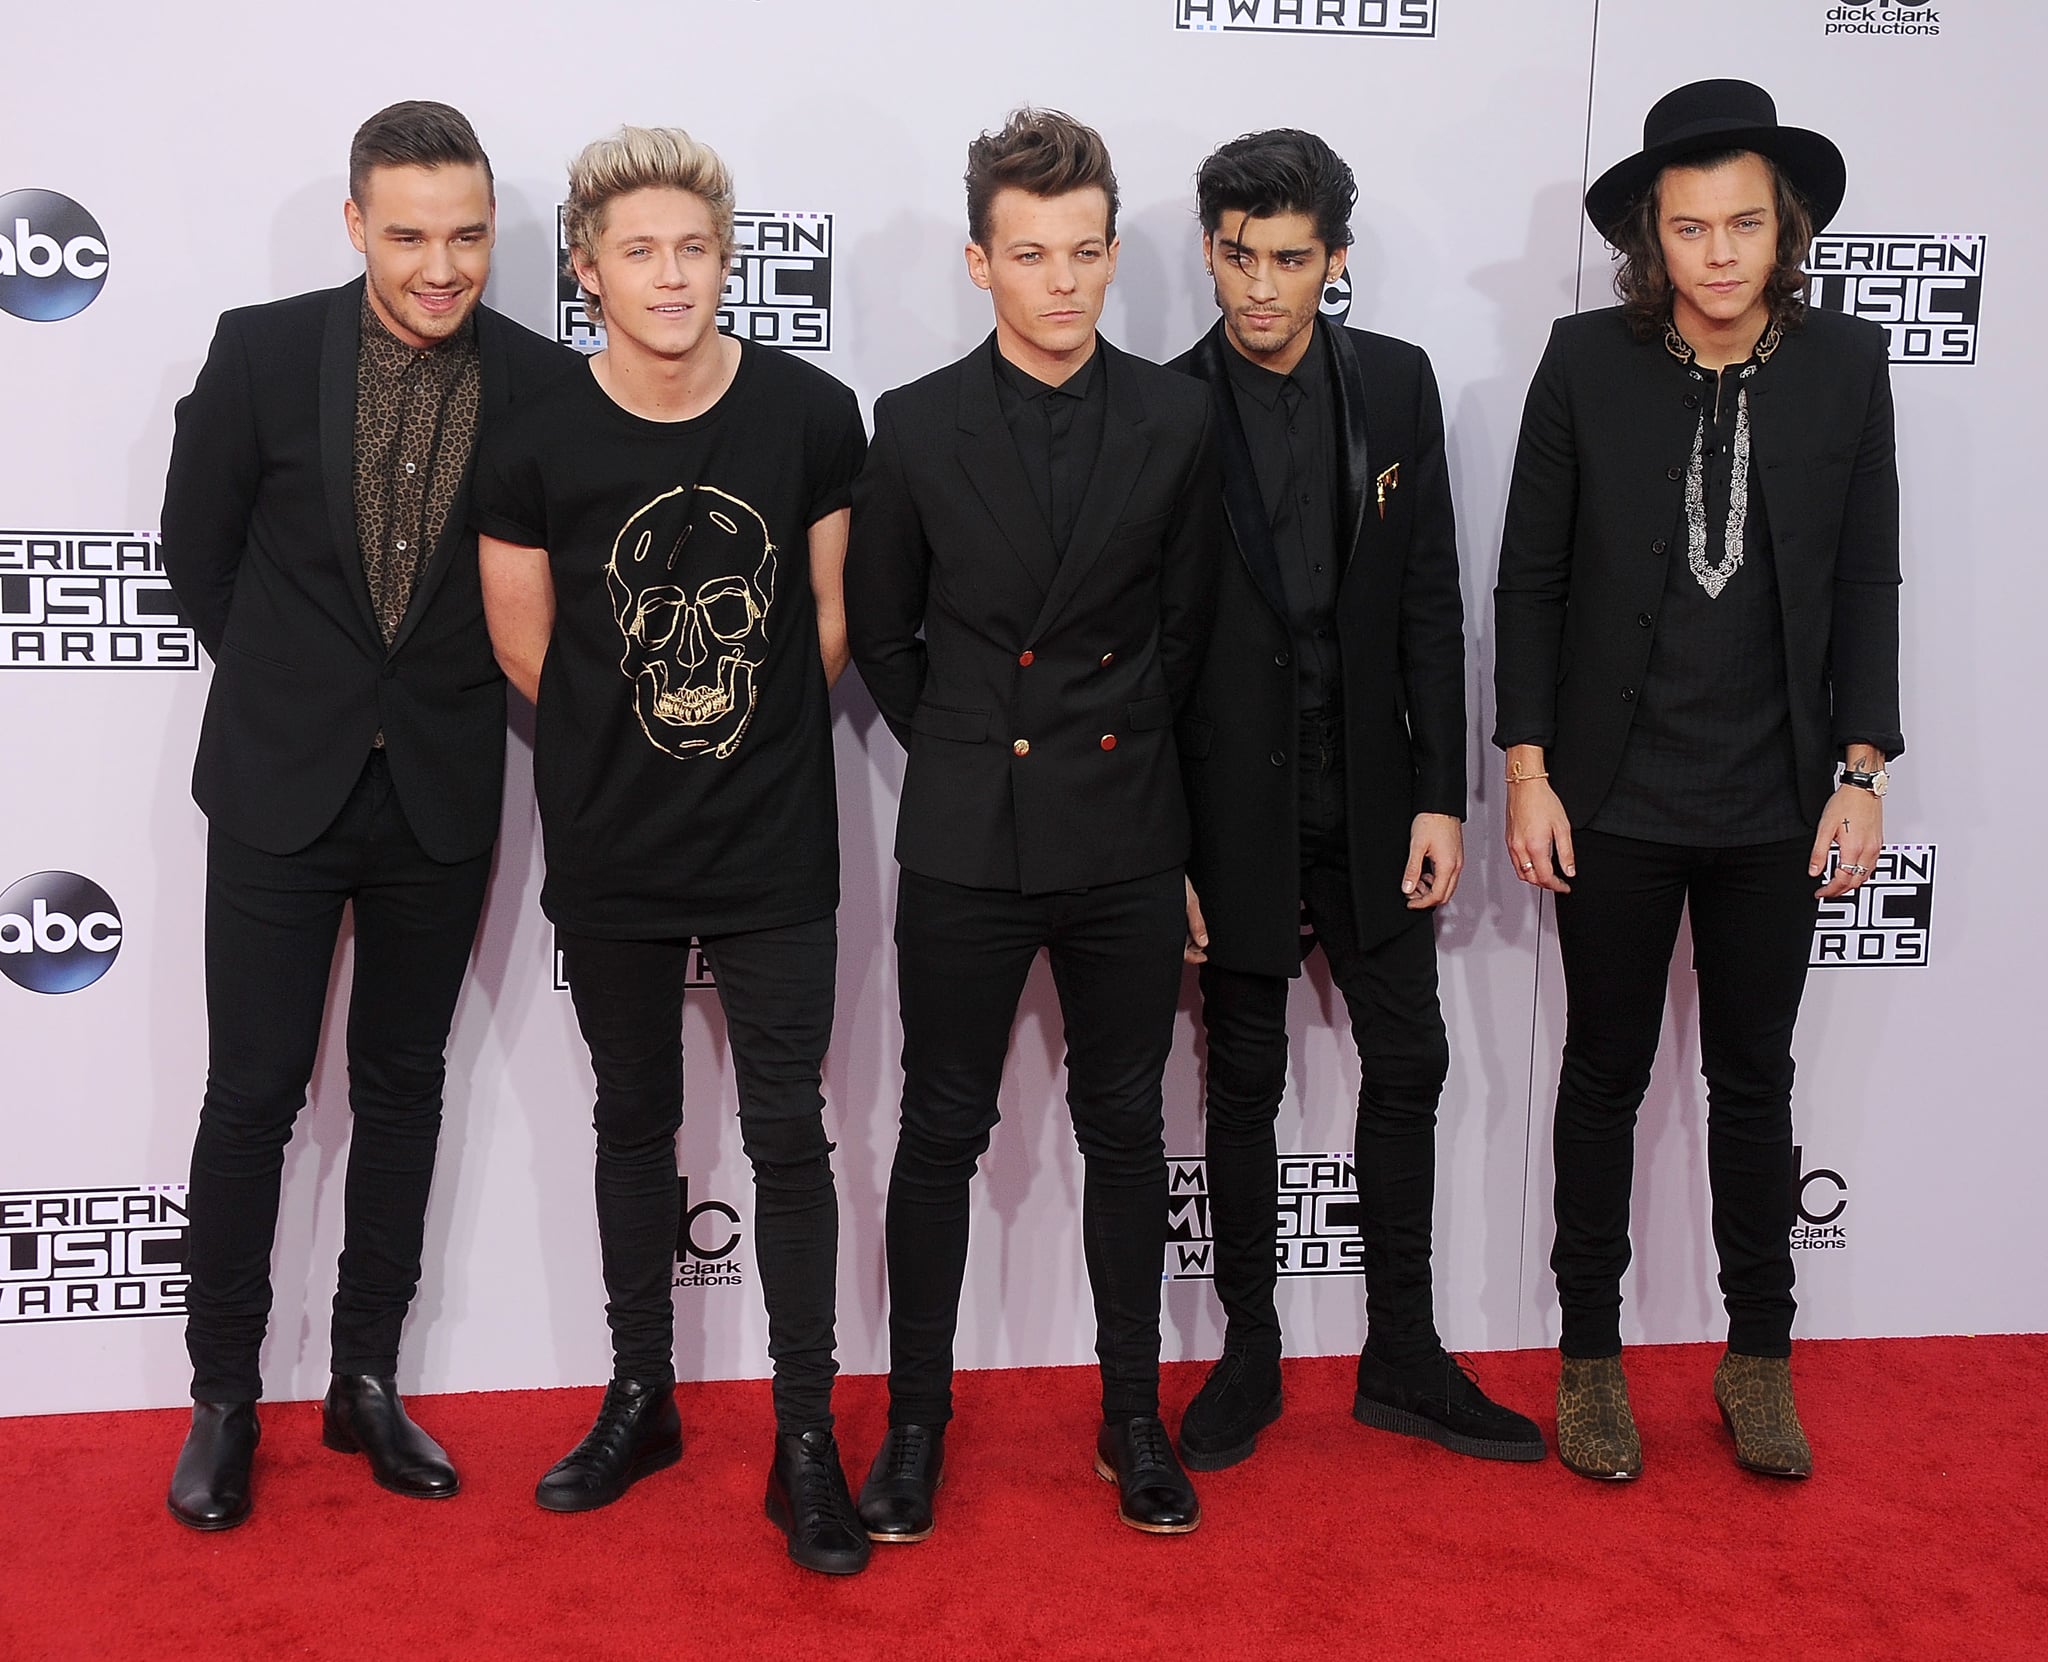 Niall Horan Skirts One Direction Reunion Rumors – but Reveals the Band Is Still Close